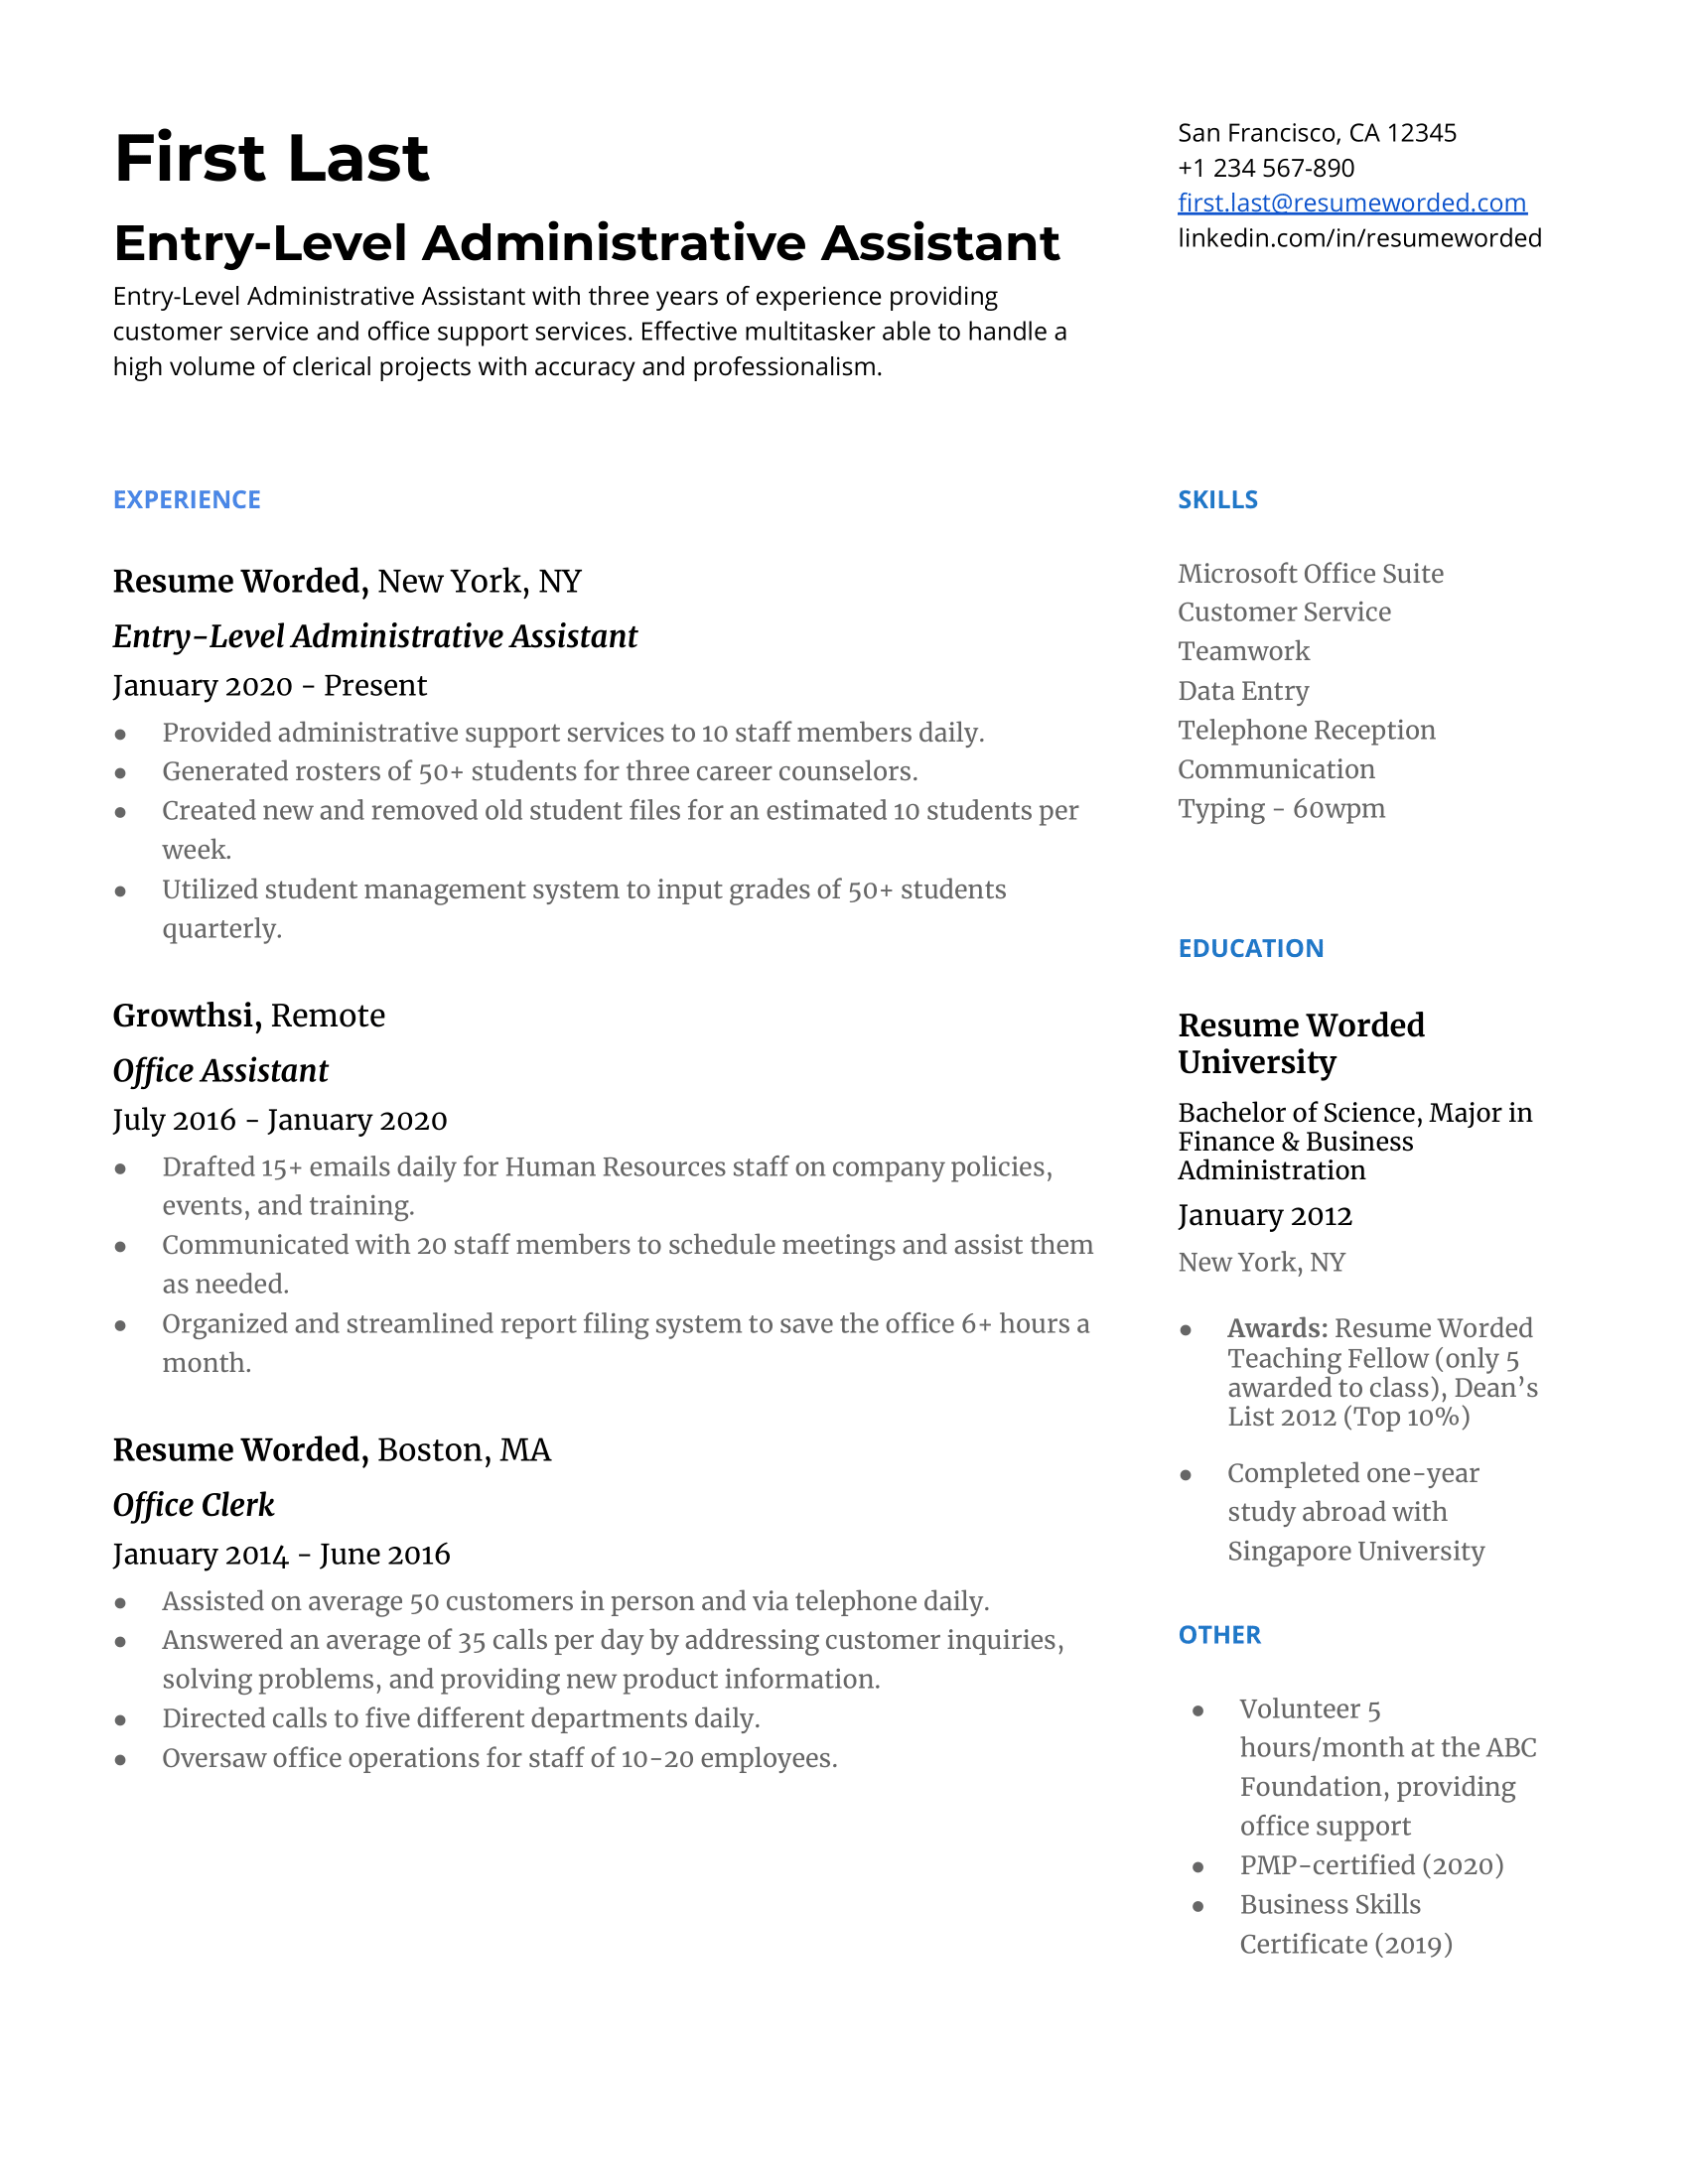 A resume for an entry level adminstrative assistant with a bachelor's degree and experience as an office assistant.